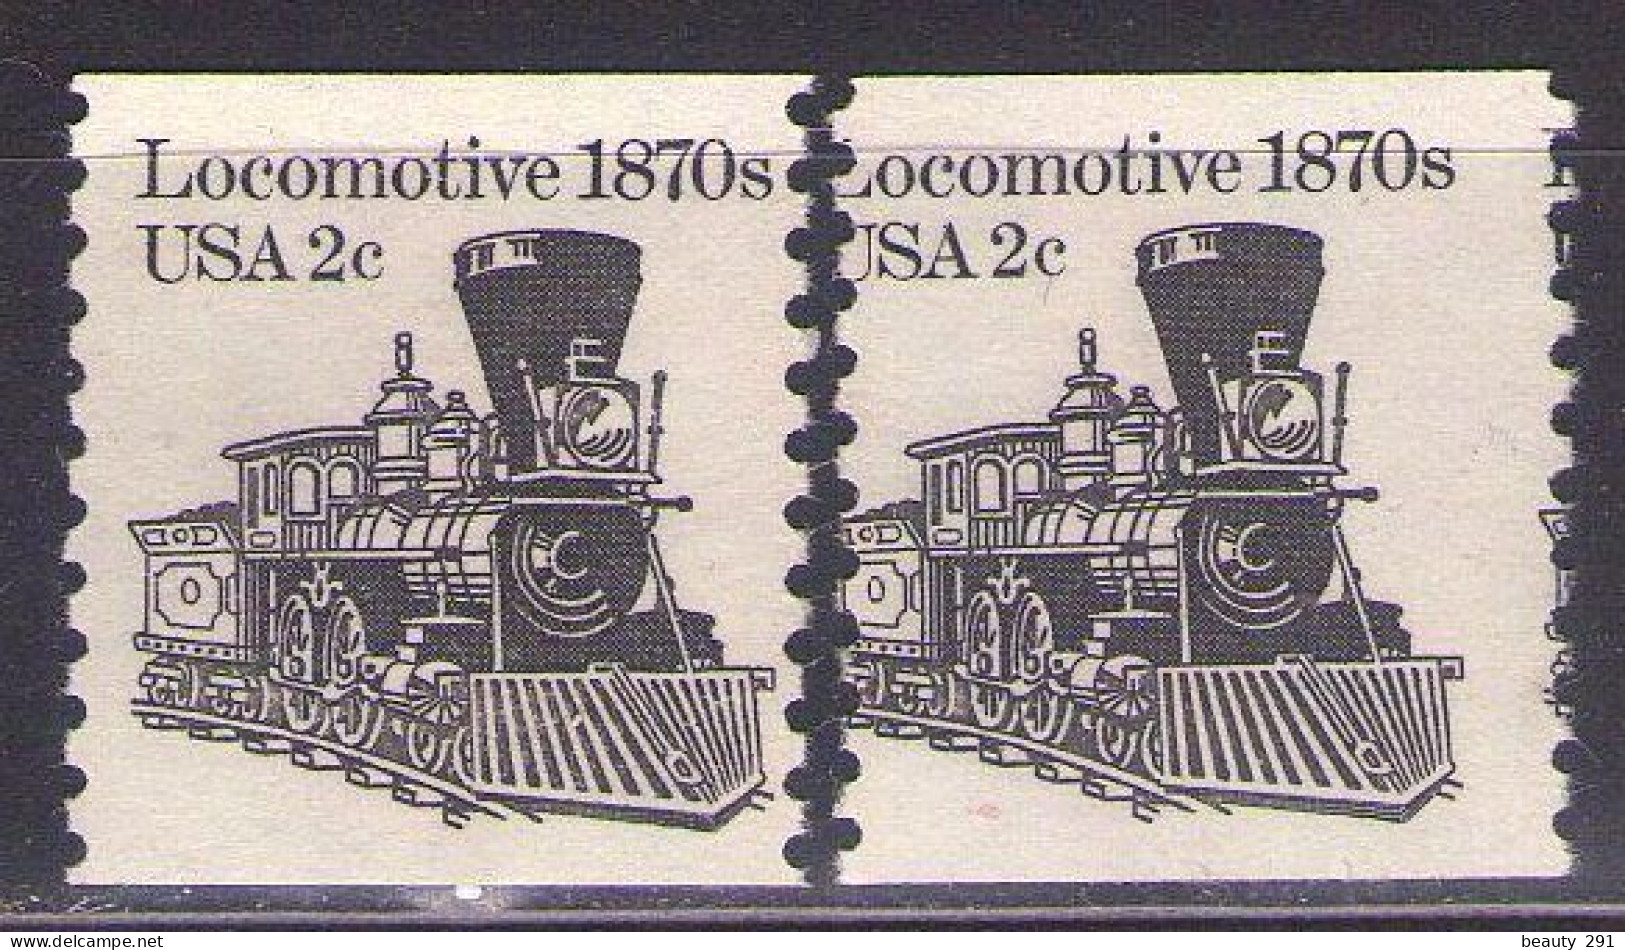 1982 Transportation Coil 2 Cent, Locomotive 1870s,MISPERFORATED, Mint Never Hinged - Errors, Freaks & Oddities (EFOs)